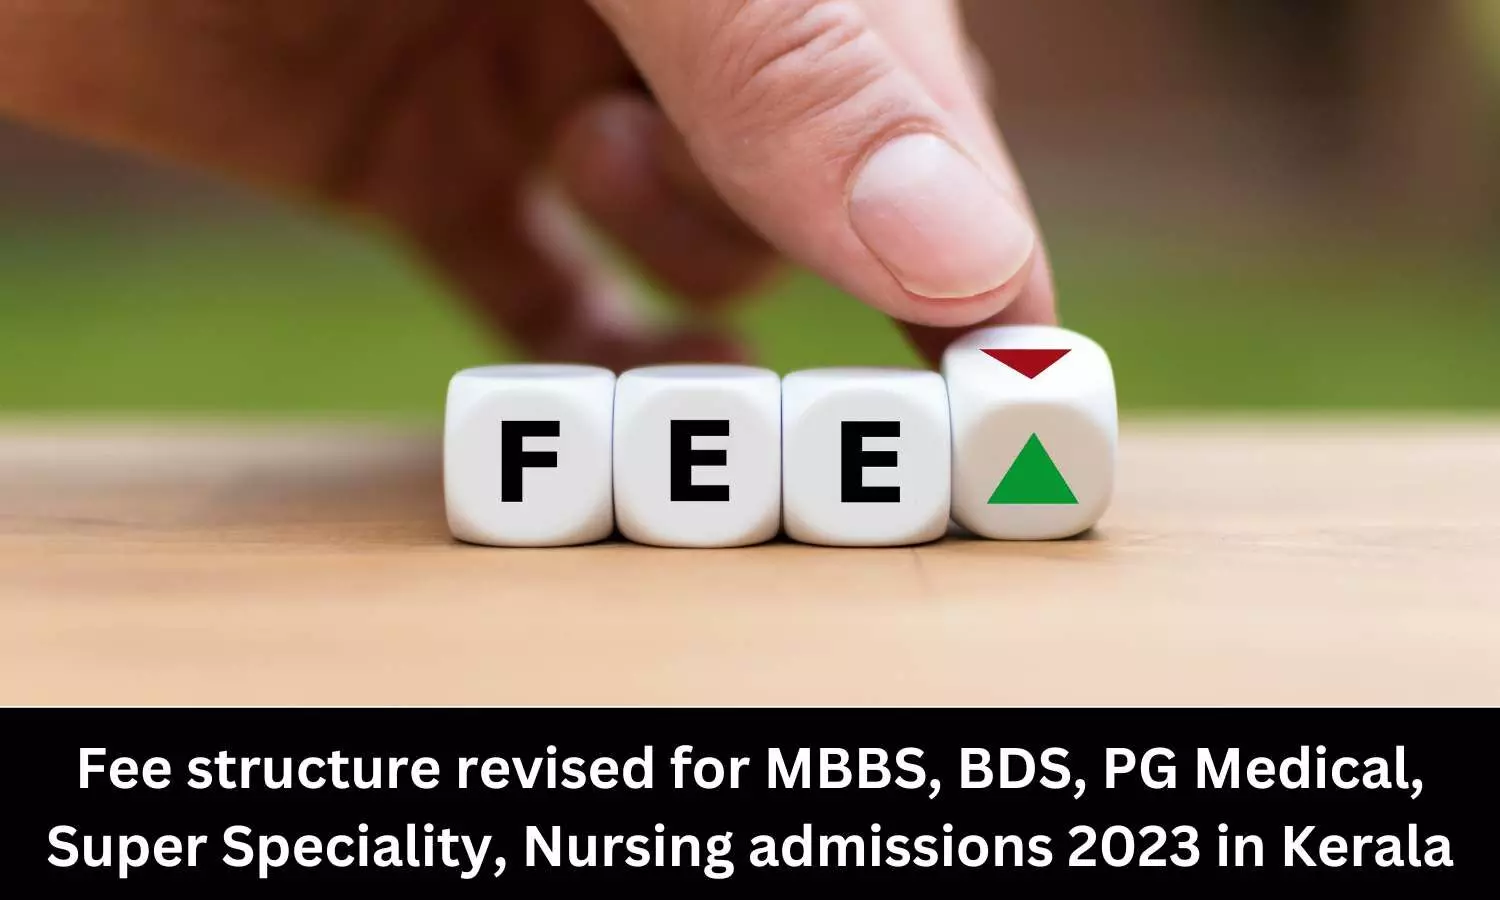 Fee structure revised for MBBS, BDS, PG Medical, Super Speciality, Nursing admissions 2023 in Kerala